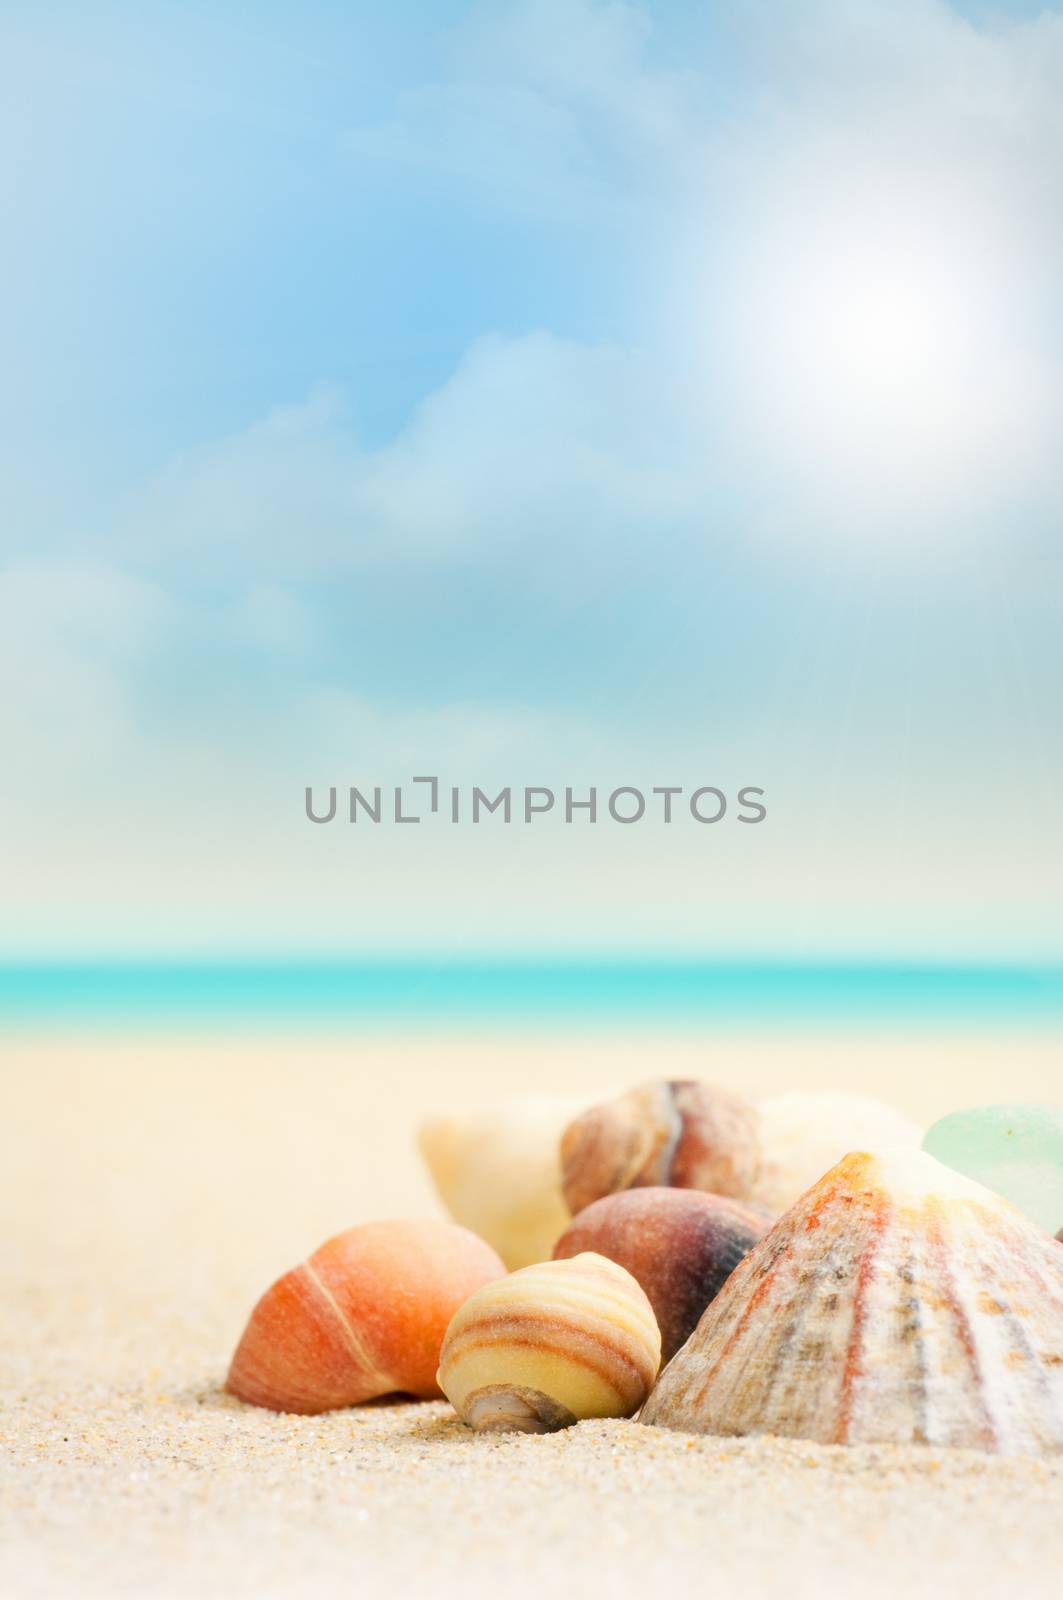 Shells on a beach in Britany with blurry background and blue sky with some clouds